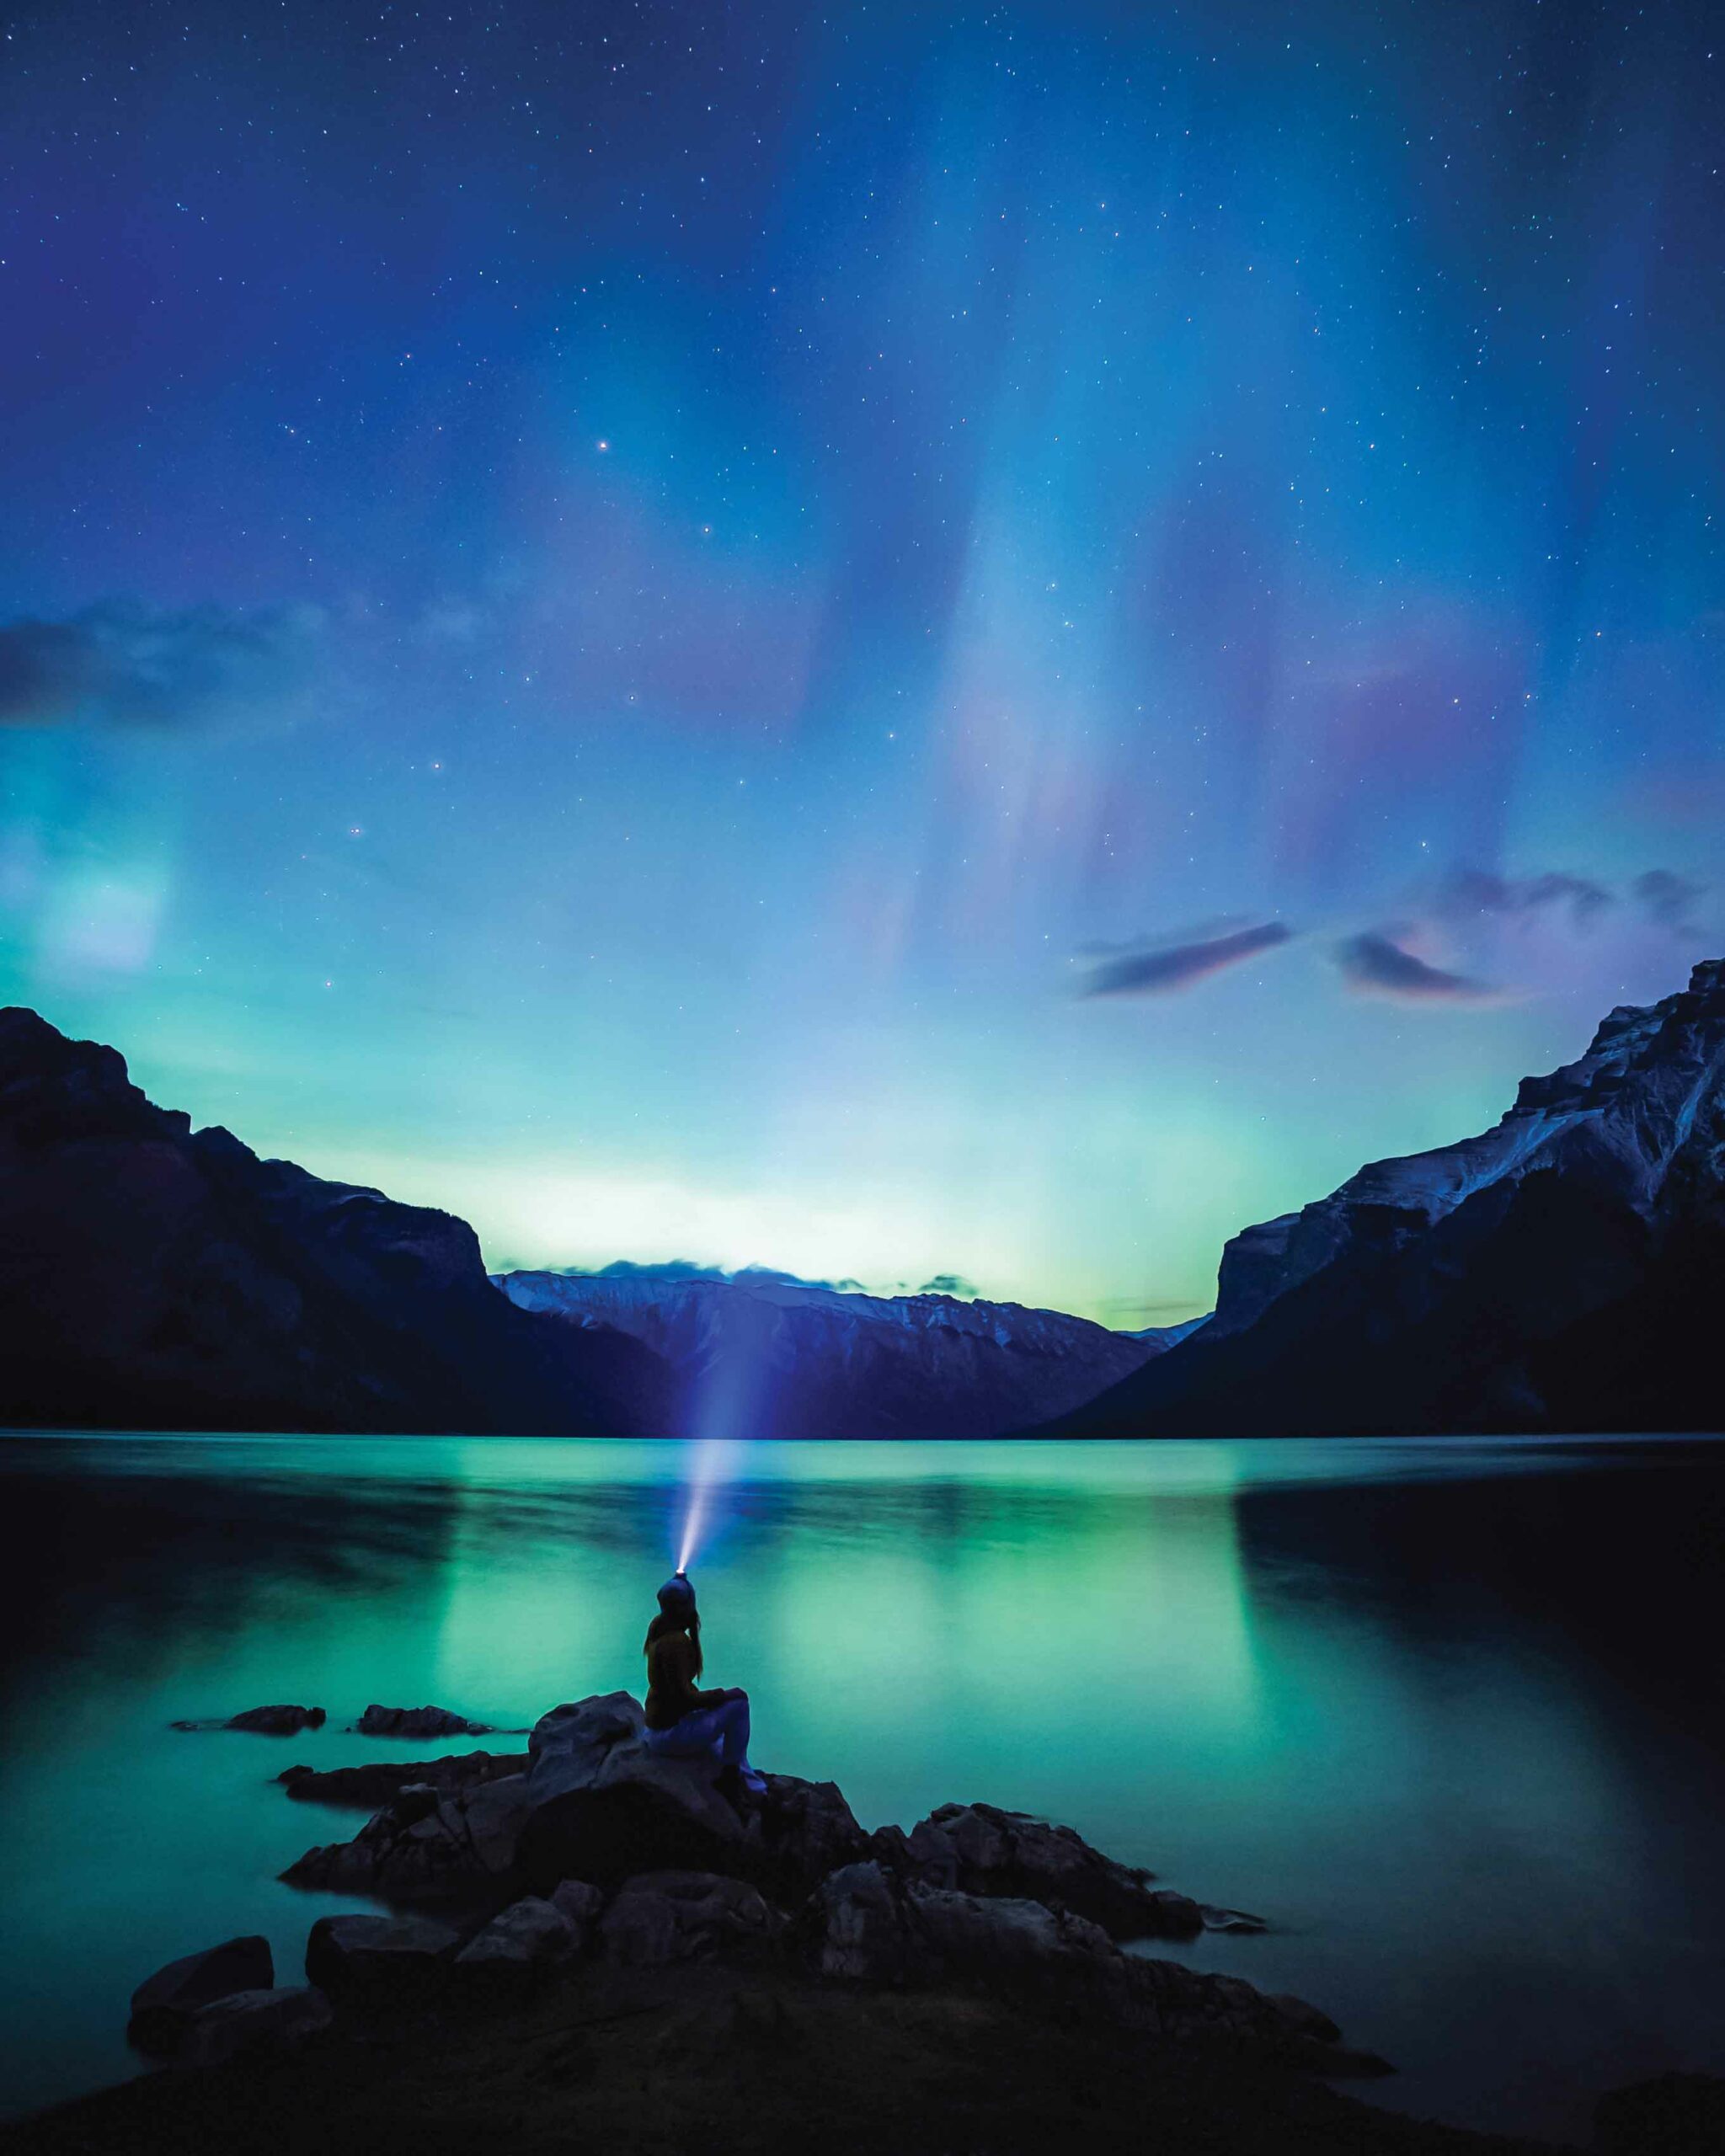 A person wearing a headlamp looks up at the northern lights reflected on the water.